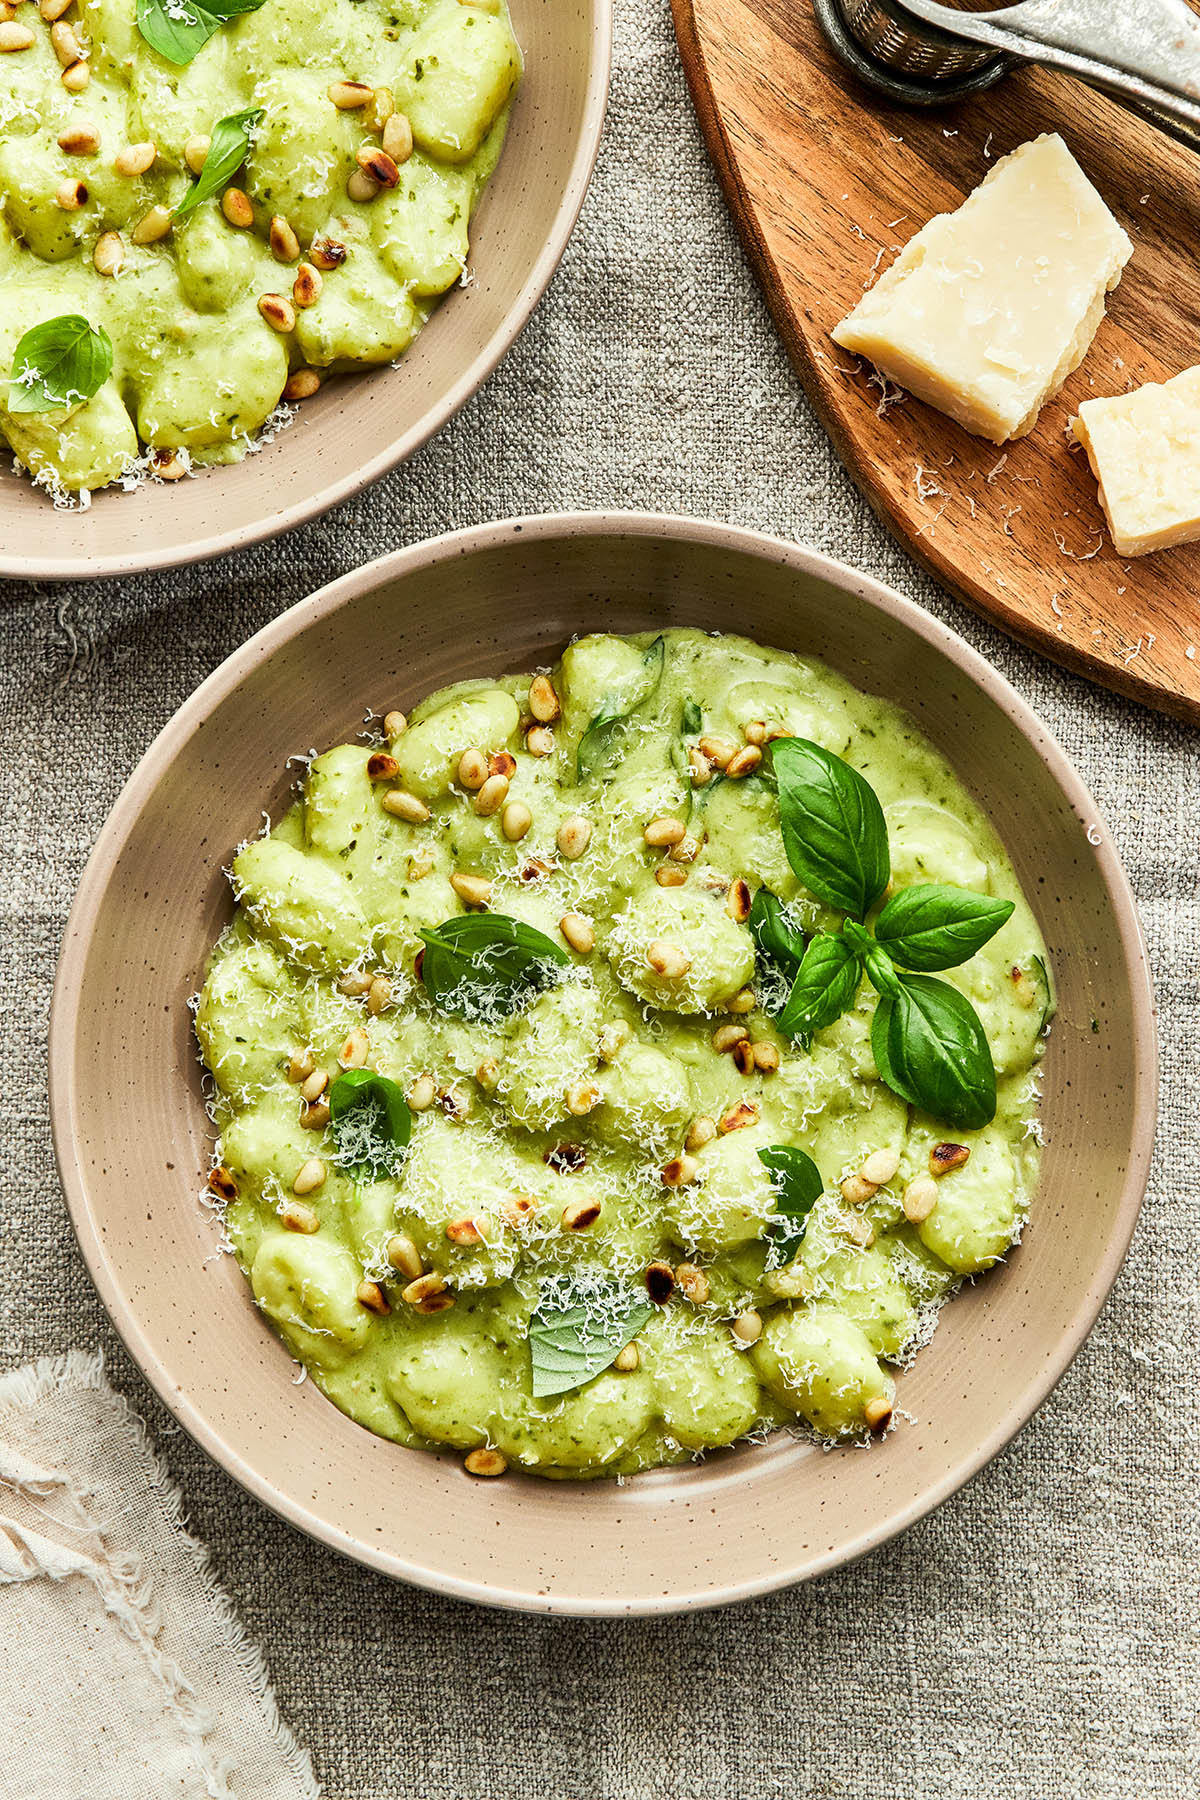 A bowl of creamy pesto gnocchi on a linen tablecloth with another bowl of pasta and a wooden cutting board with chunks of Parmesan cheese nearby.